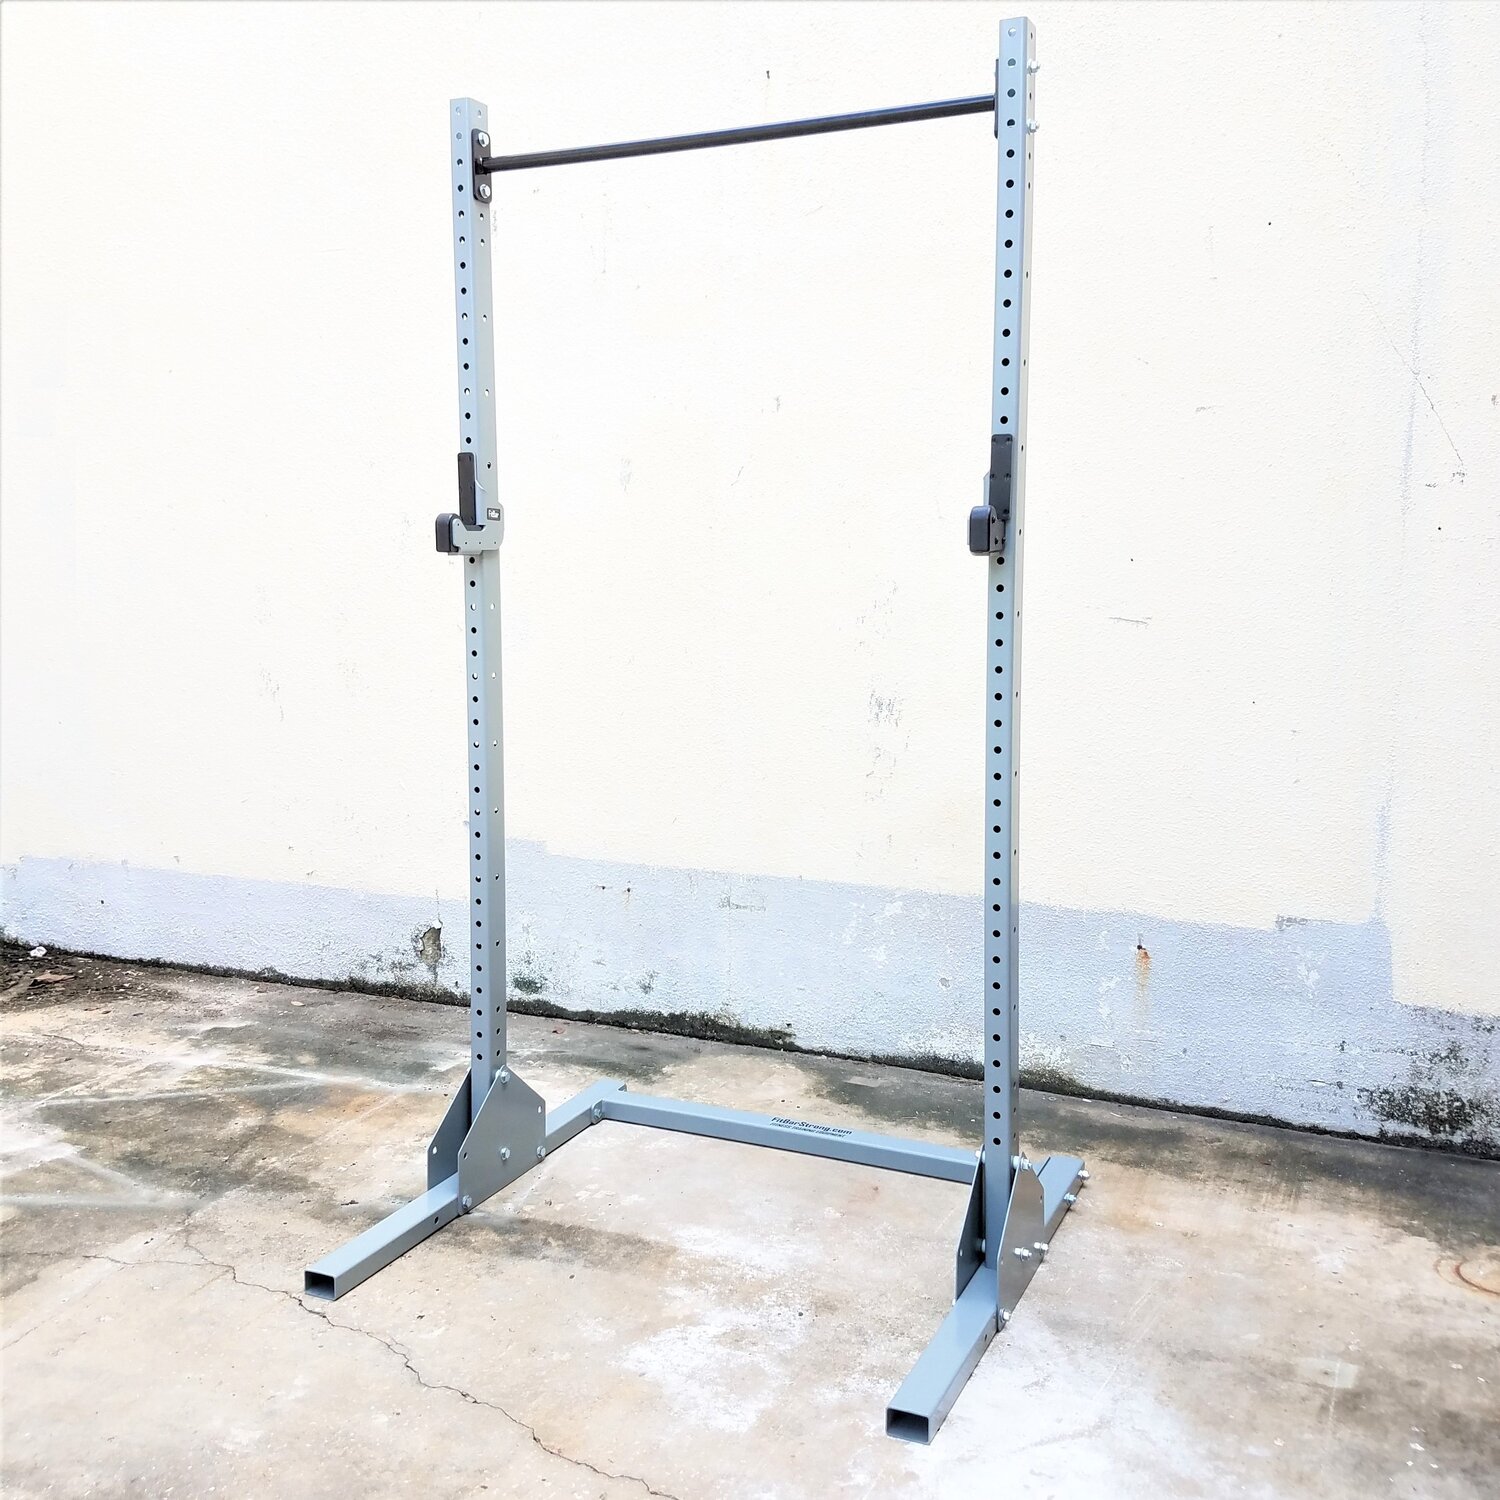 Stand Up Bar - FitBar Grip, Obstacle, Equipment